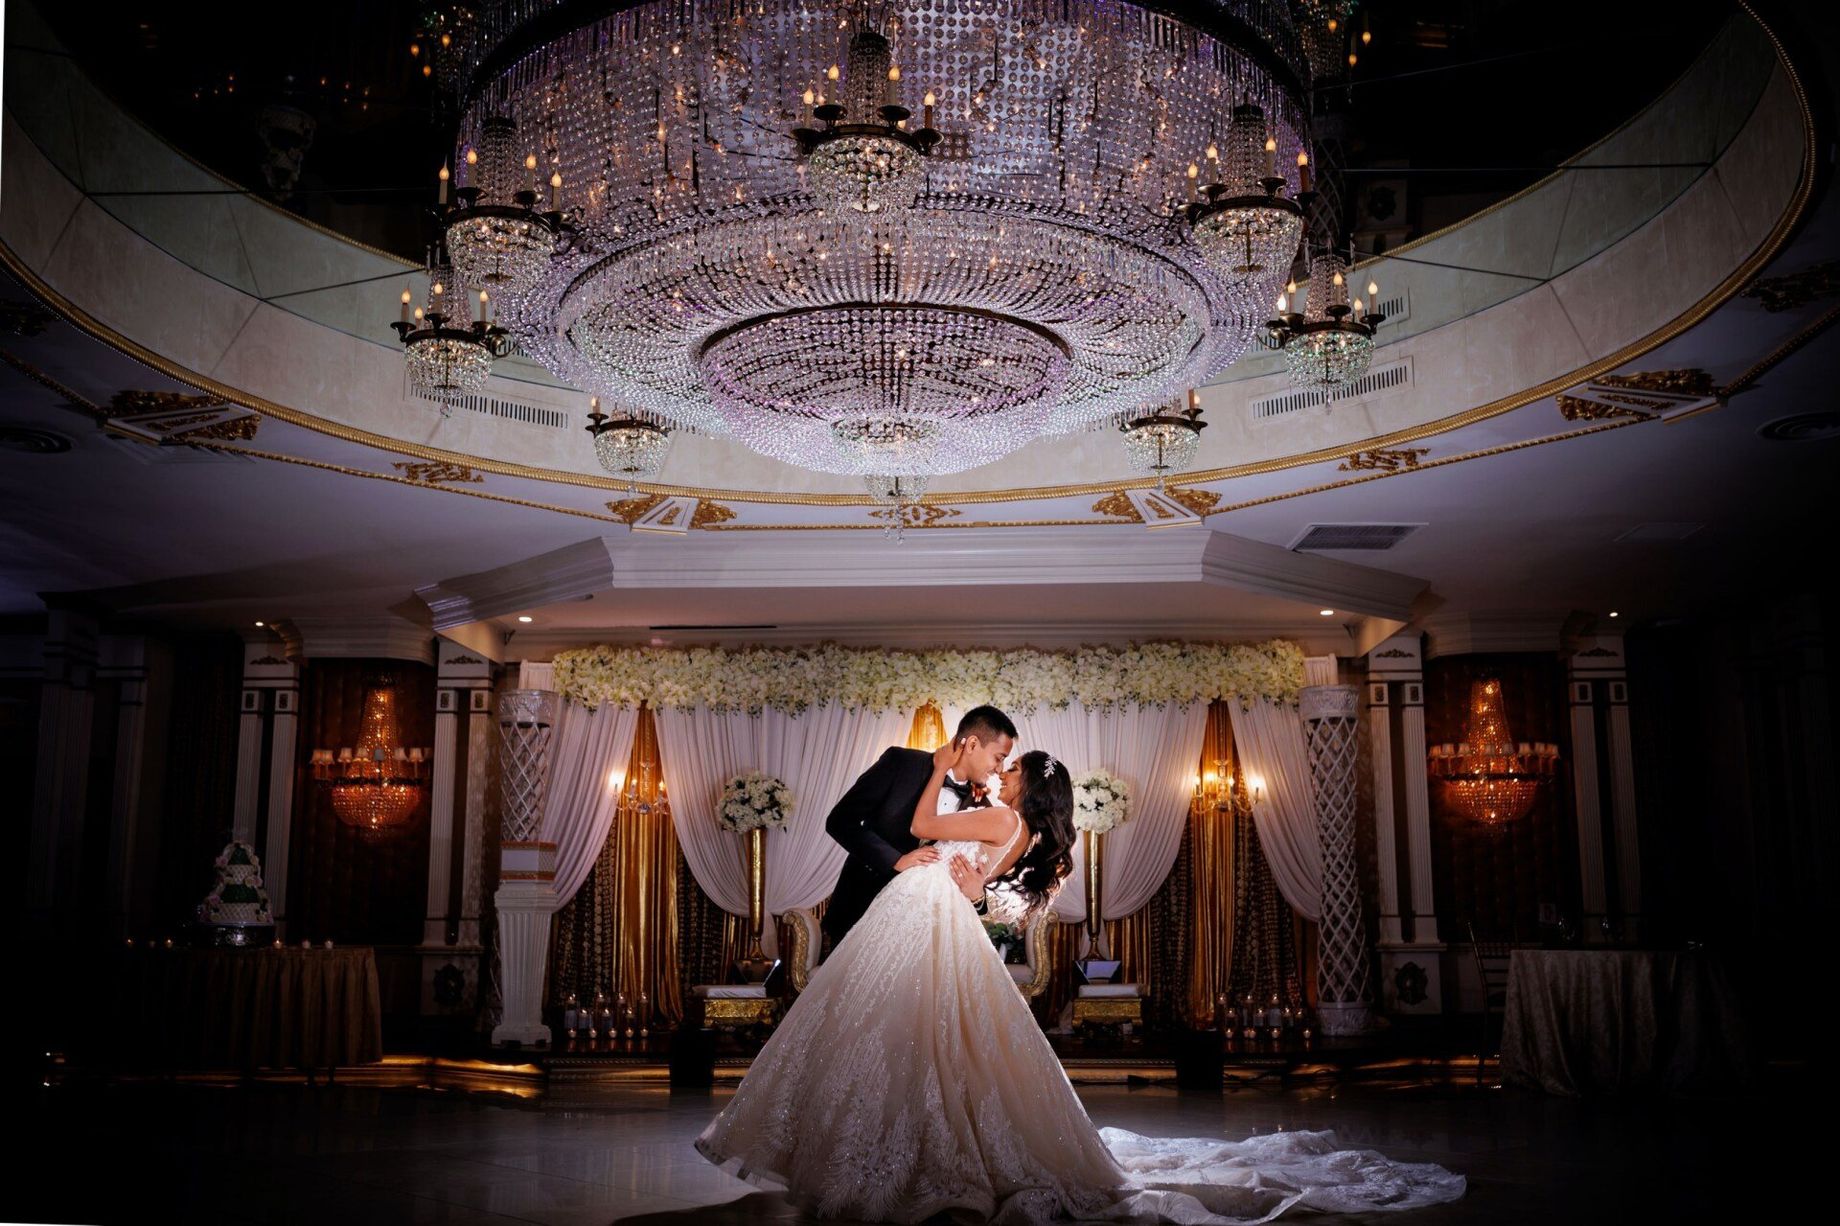 Best Wedding Photographer in NYC and FL | Best NY FL Photographer | Wedding Photography | New York Wedding Photographer | Best Wedding Photographer in Florida | Wedding photographers florida | nyc wedding photography |